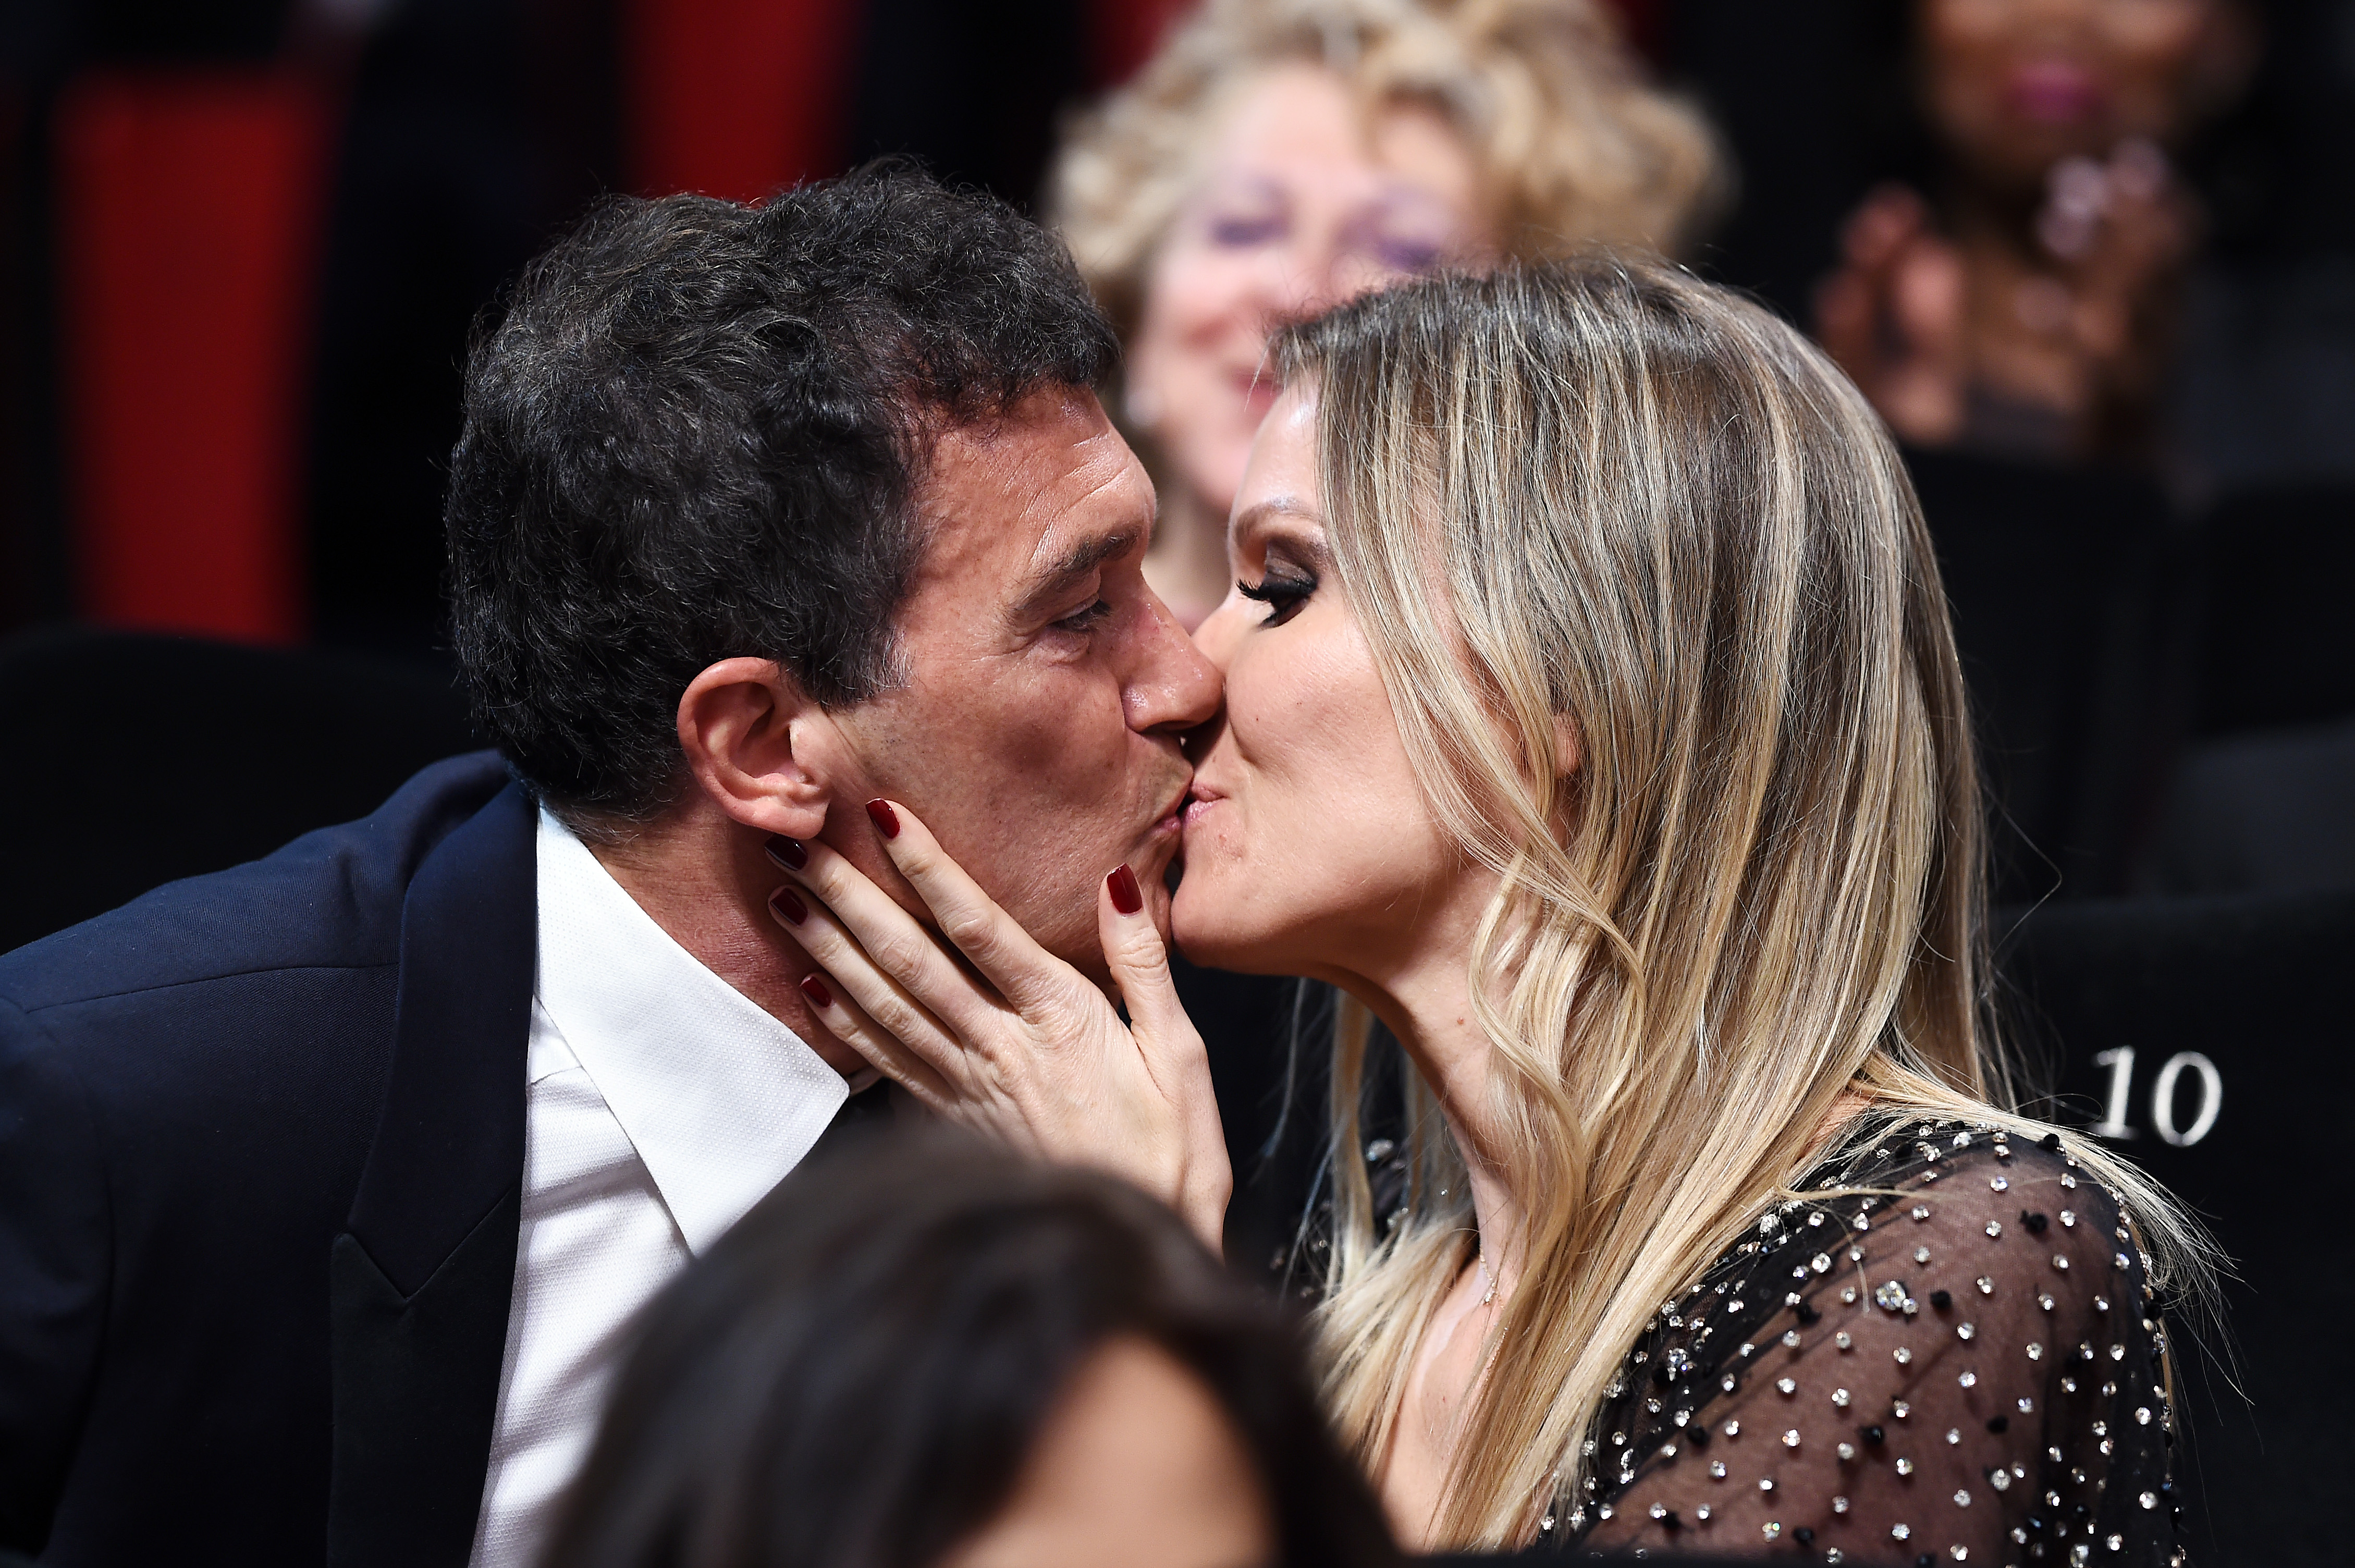 Antonio Banderas and Nicole Kimpel at the 72nd annual Cannes Film Festival on May 25, 2019 | Source: Getty Images